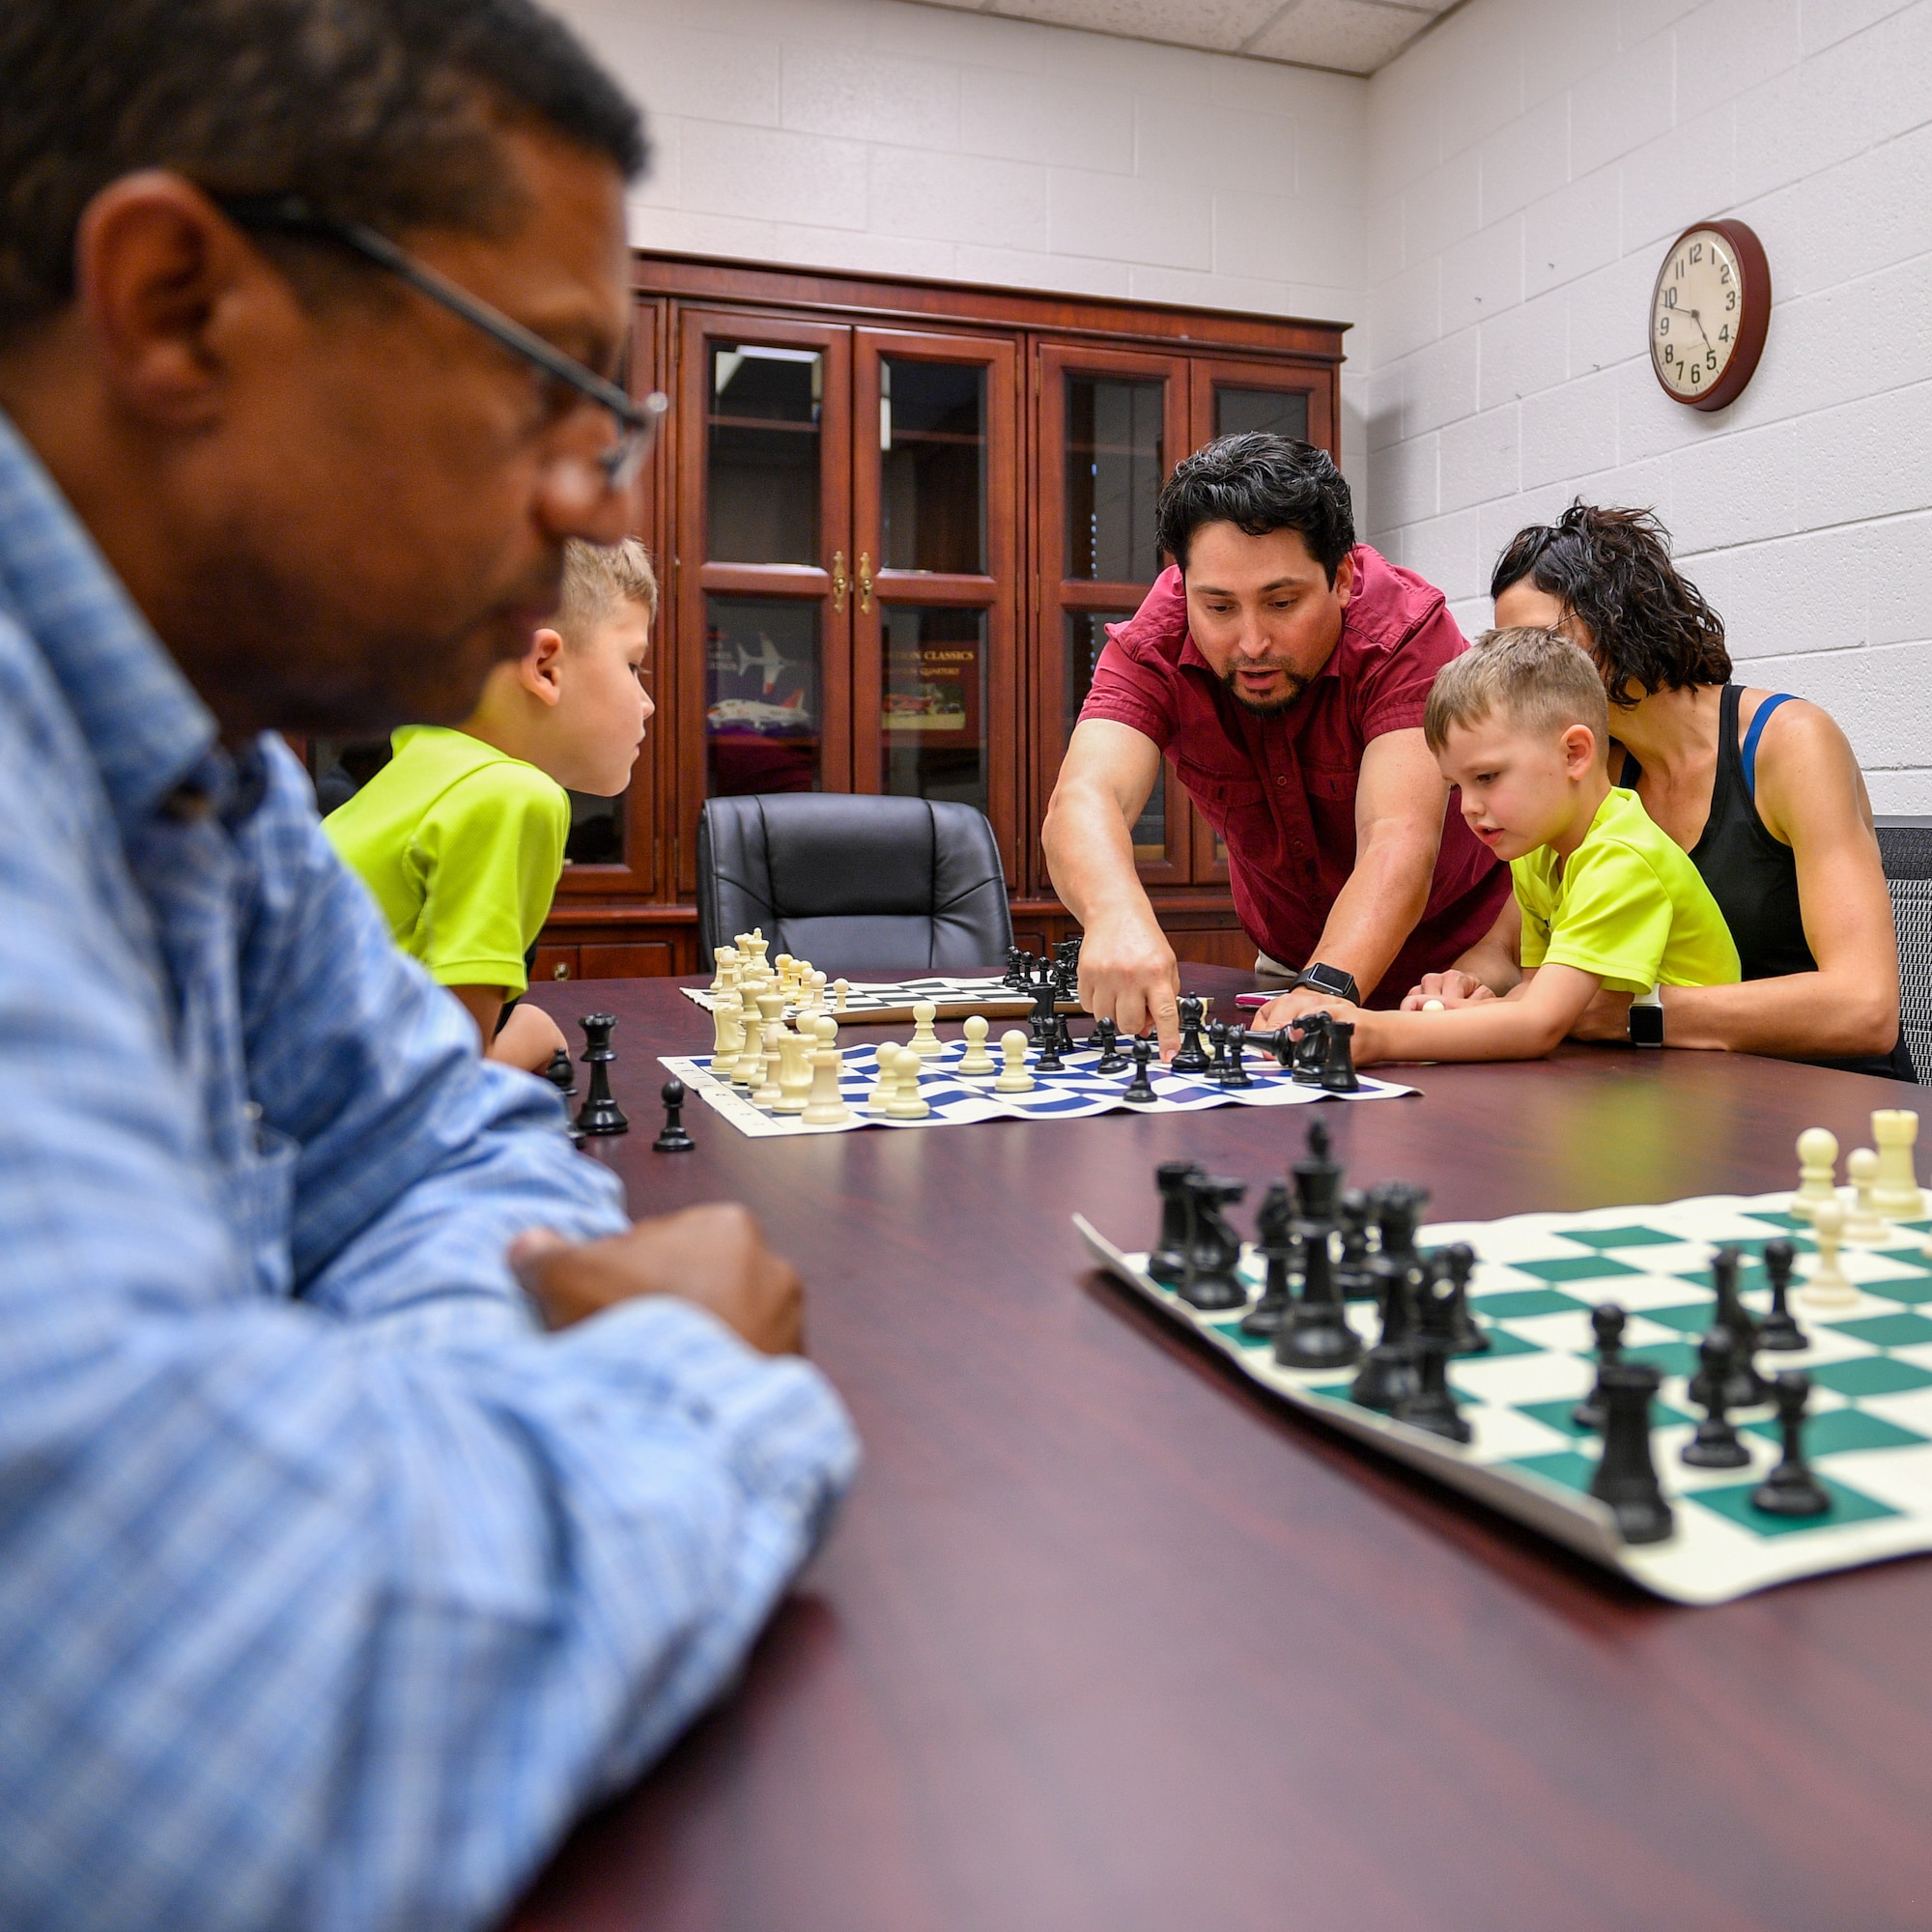 Marc Garcia provides instruction to players during a chess club meeting at Hill Air Force Base, Utah, July 26, 2018. Hosted by the Gerrity Memorial Library, the club weclomes players of all ages and skill levels. (U.S. Air Force photo by R. Nial Bradshaw)